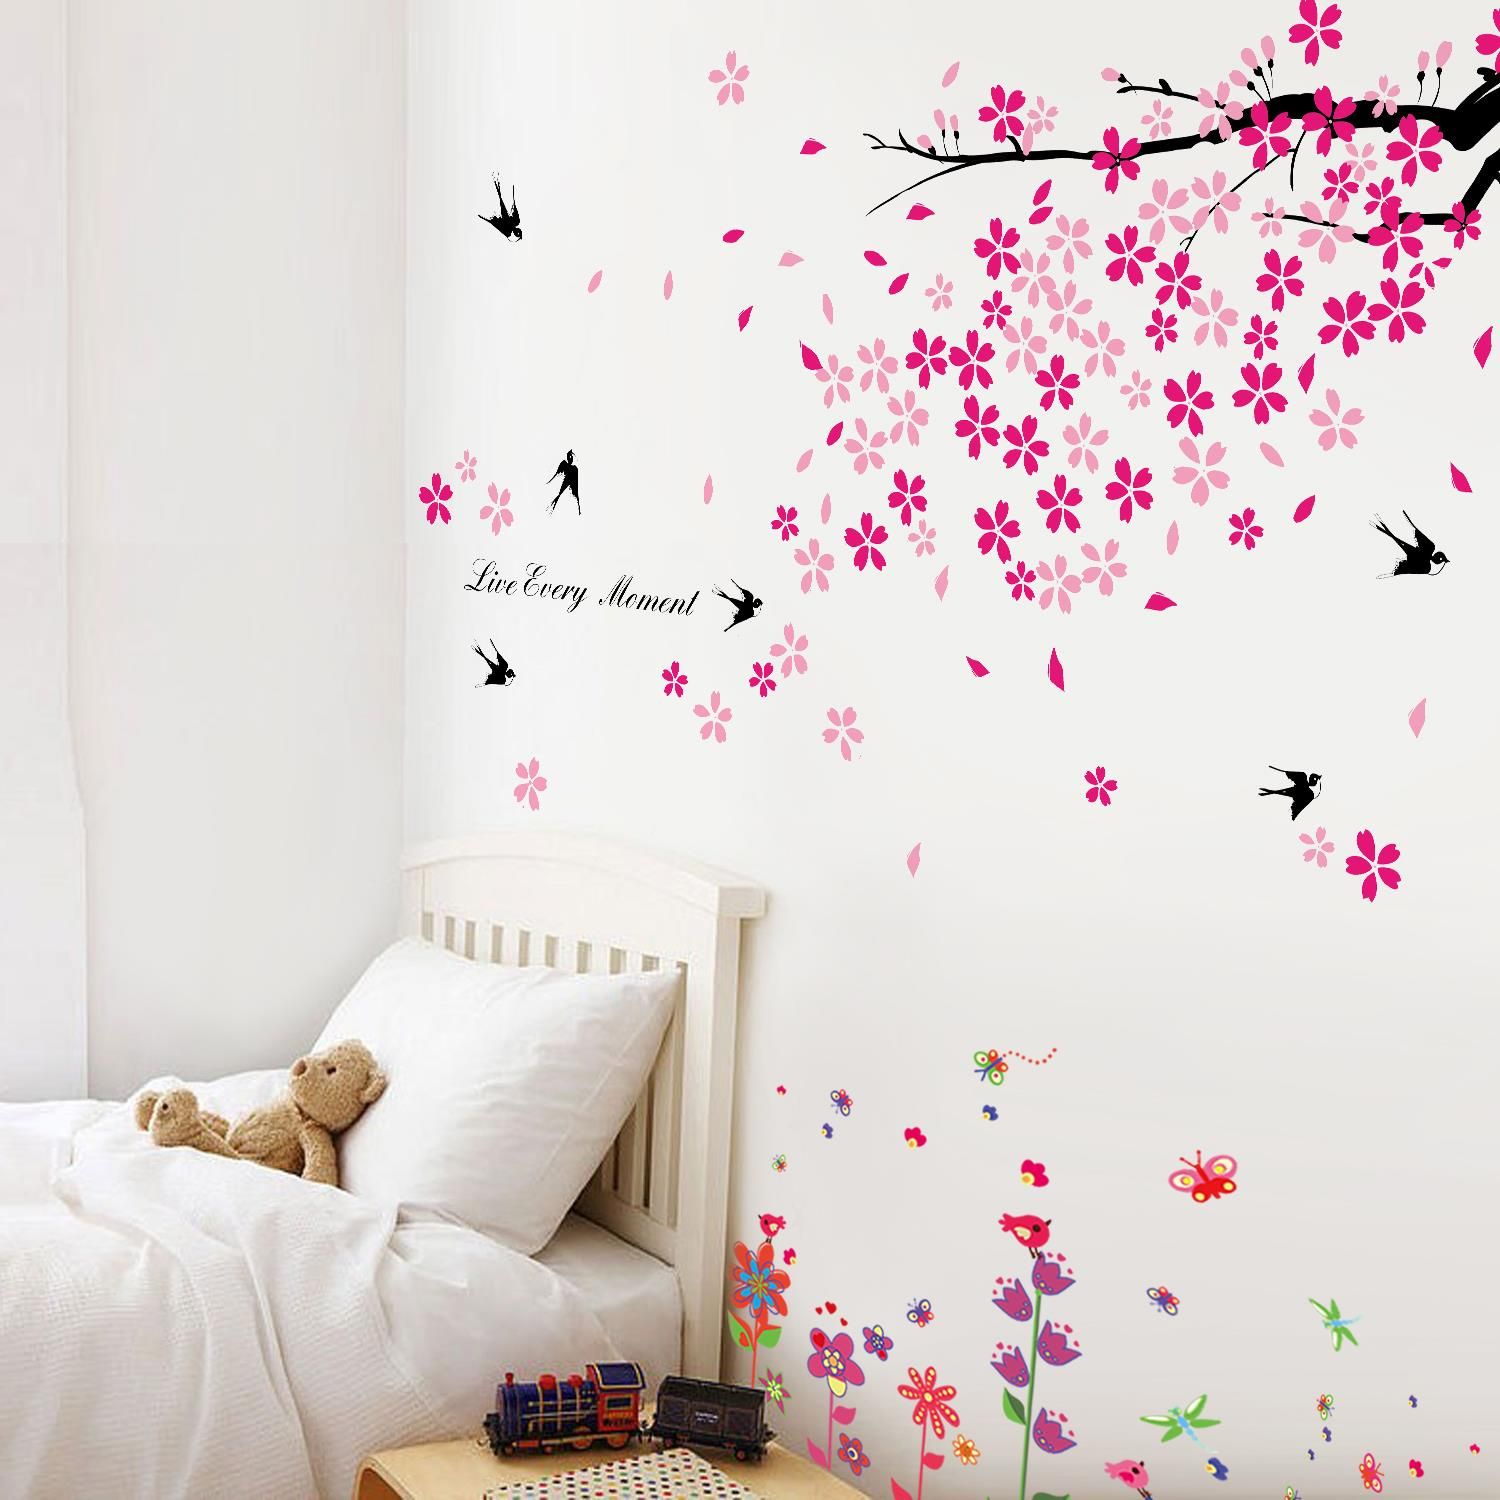 - Transform your room with the stunning Walplus wall sticker collection.
- Walplus' high quality self-adhesive stickers are quick to apply, and can be easily removed and repositioned without damage.
- Simply peel and stick to any smooth, even surface.
- Application instructions included.
- Eco-friendly materials and Non-toxic.